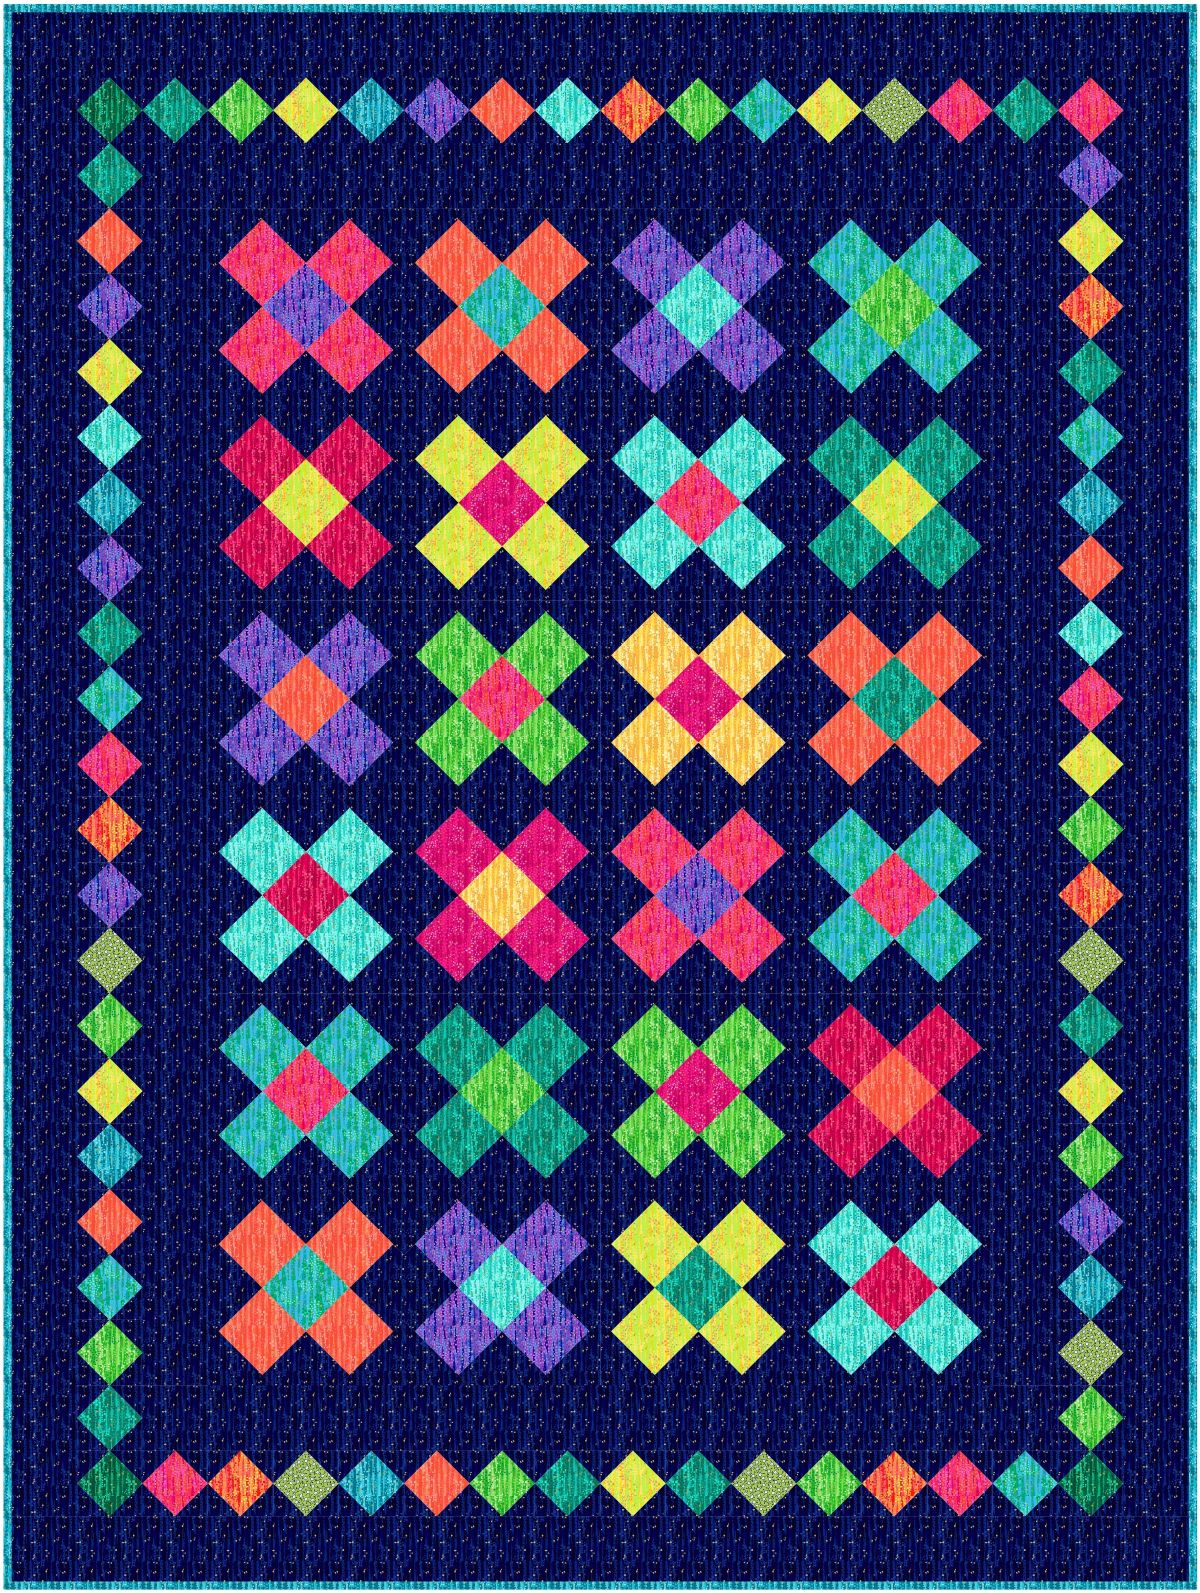 Belle Quilt Pattern PDF DOWNLOAD Busy Hands Quilts $12.99